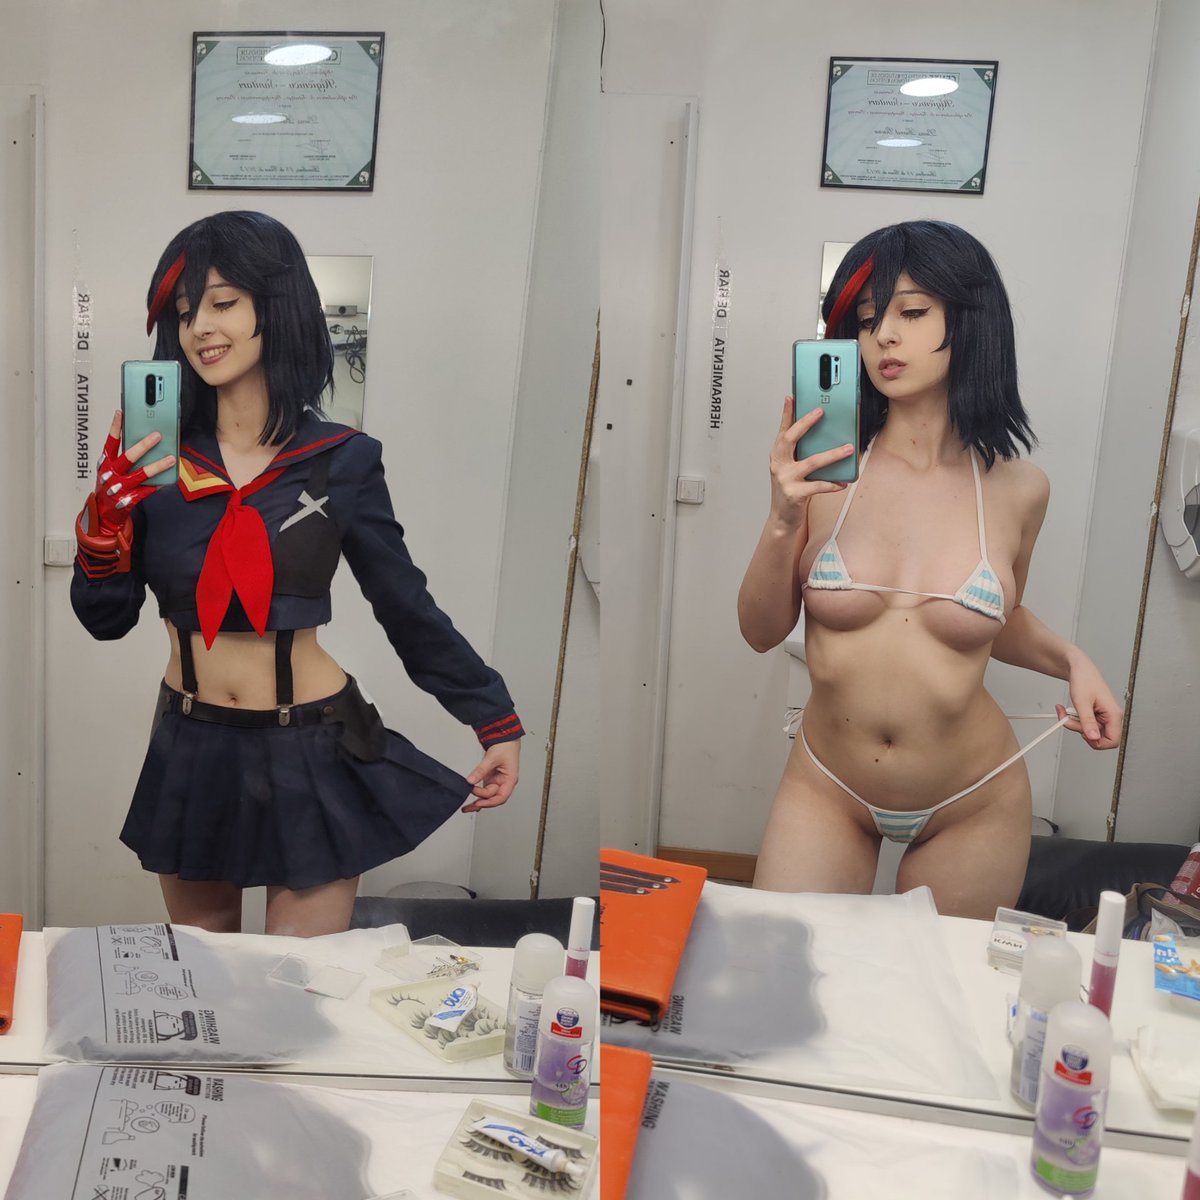 Ryuko from Killlakill and a bunch of other e-girl shenanigans